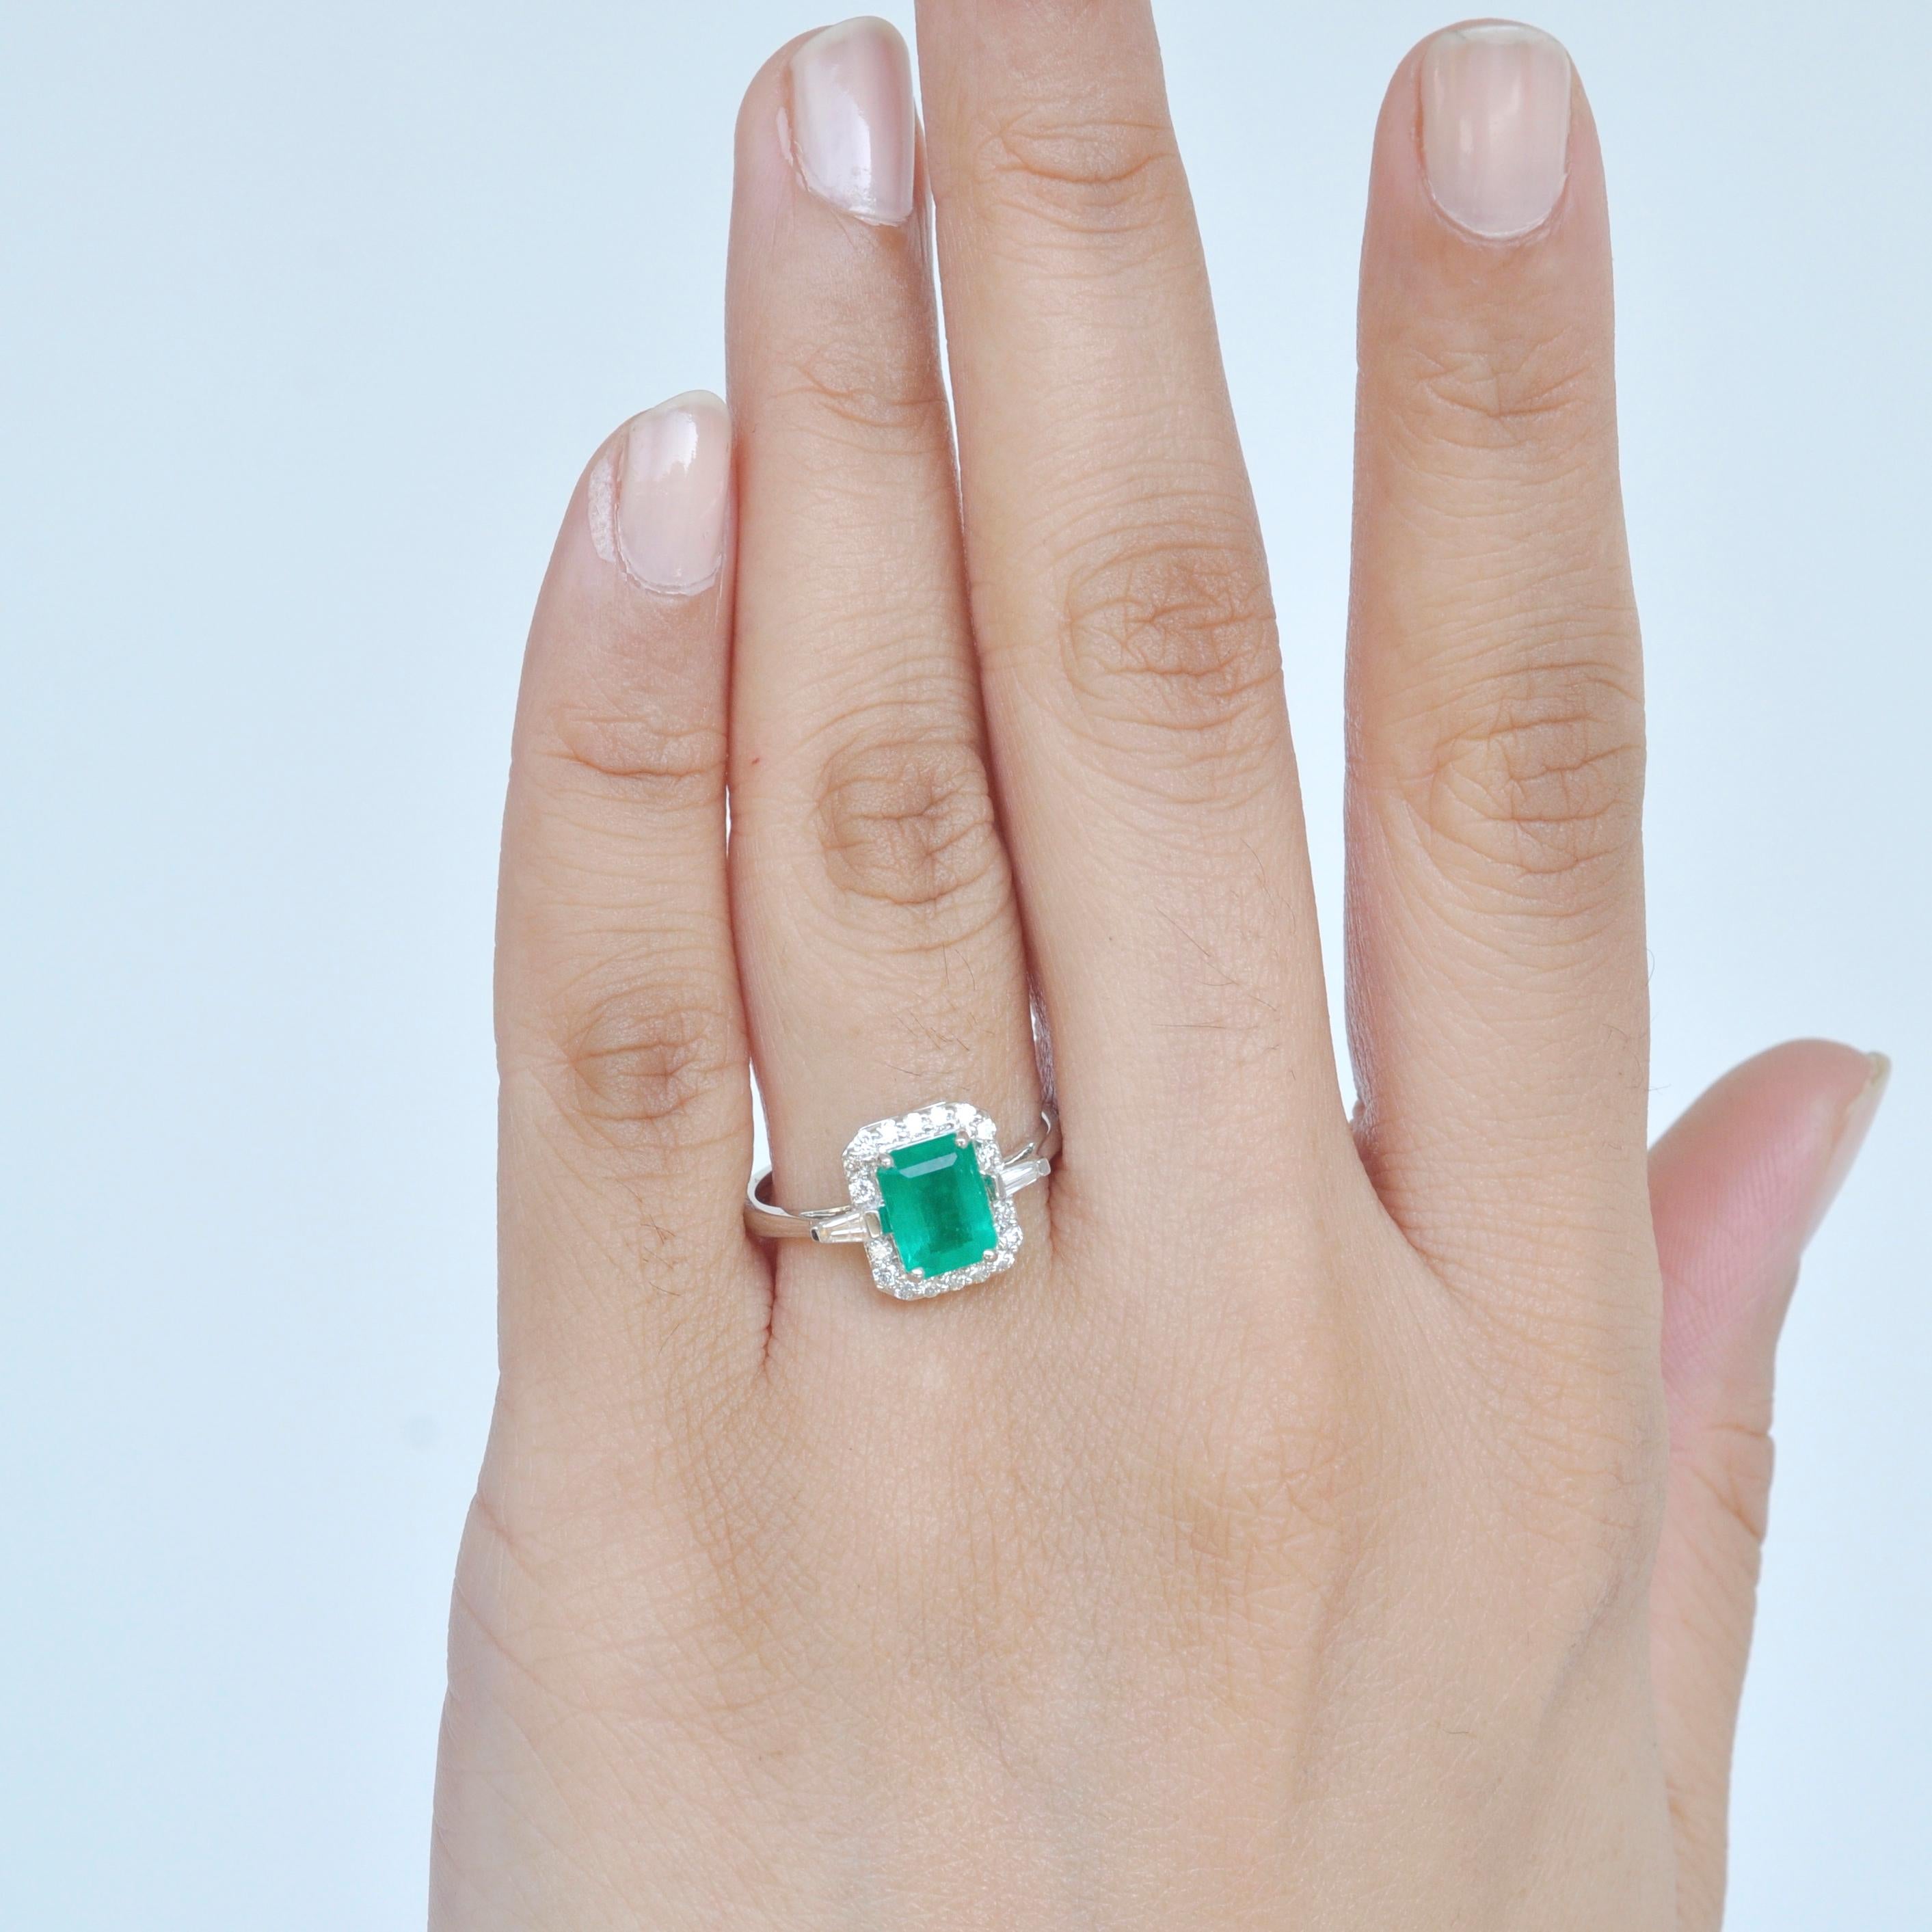 18 Karat White Gold Emerald Cut Colombian Emerald Diamond Contemporary Ring In New Condition For Sale In Jaipur, Rajasthan